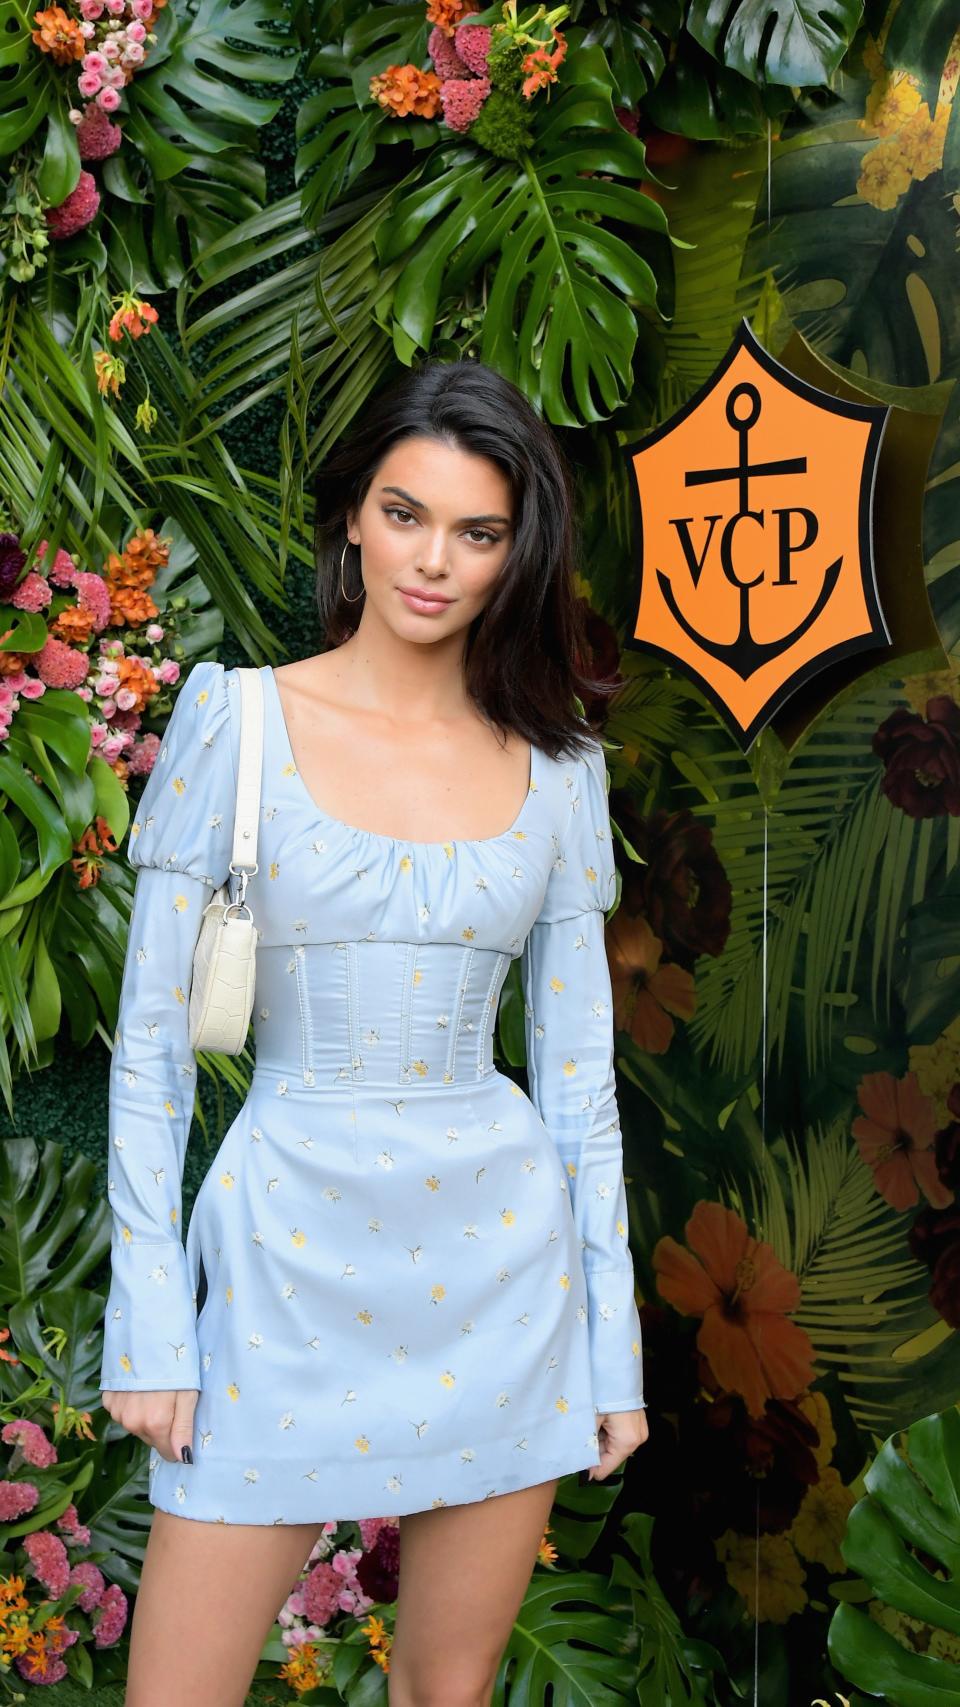 PACIFIC PALISADES, CA - OCTOBER 06:  (EDITORS NOTE: Retransmission with alternate crop.) Kendall Jenner attends the Ninth-Annual Veuve Clicquot Polo Classic Los Angeles at Will Rogers State Historic Park on October 6, 2018 in Pacific Palisades, California.  (Photo by Charley Gallay/Getty Images for Veuve Clicquot)